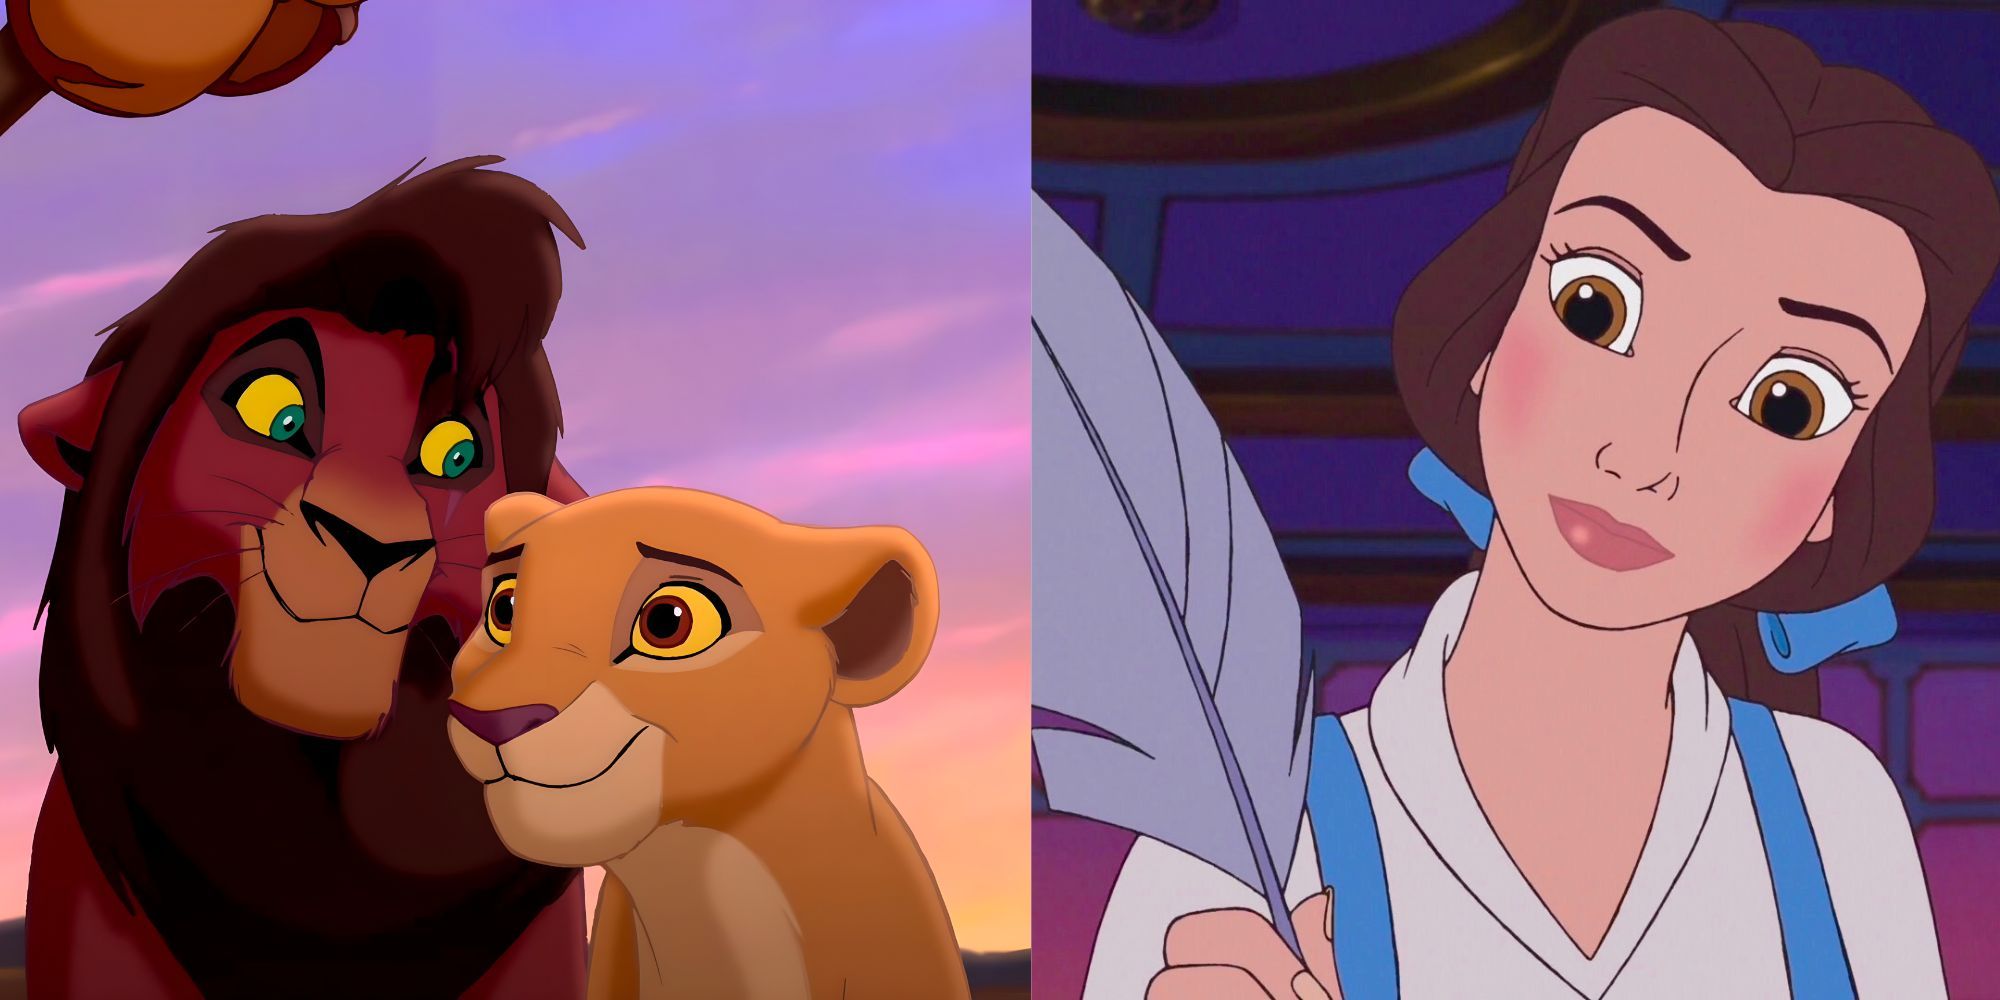 13 Things You Didn't Know About Beauty and the Beast